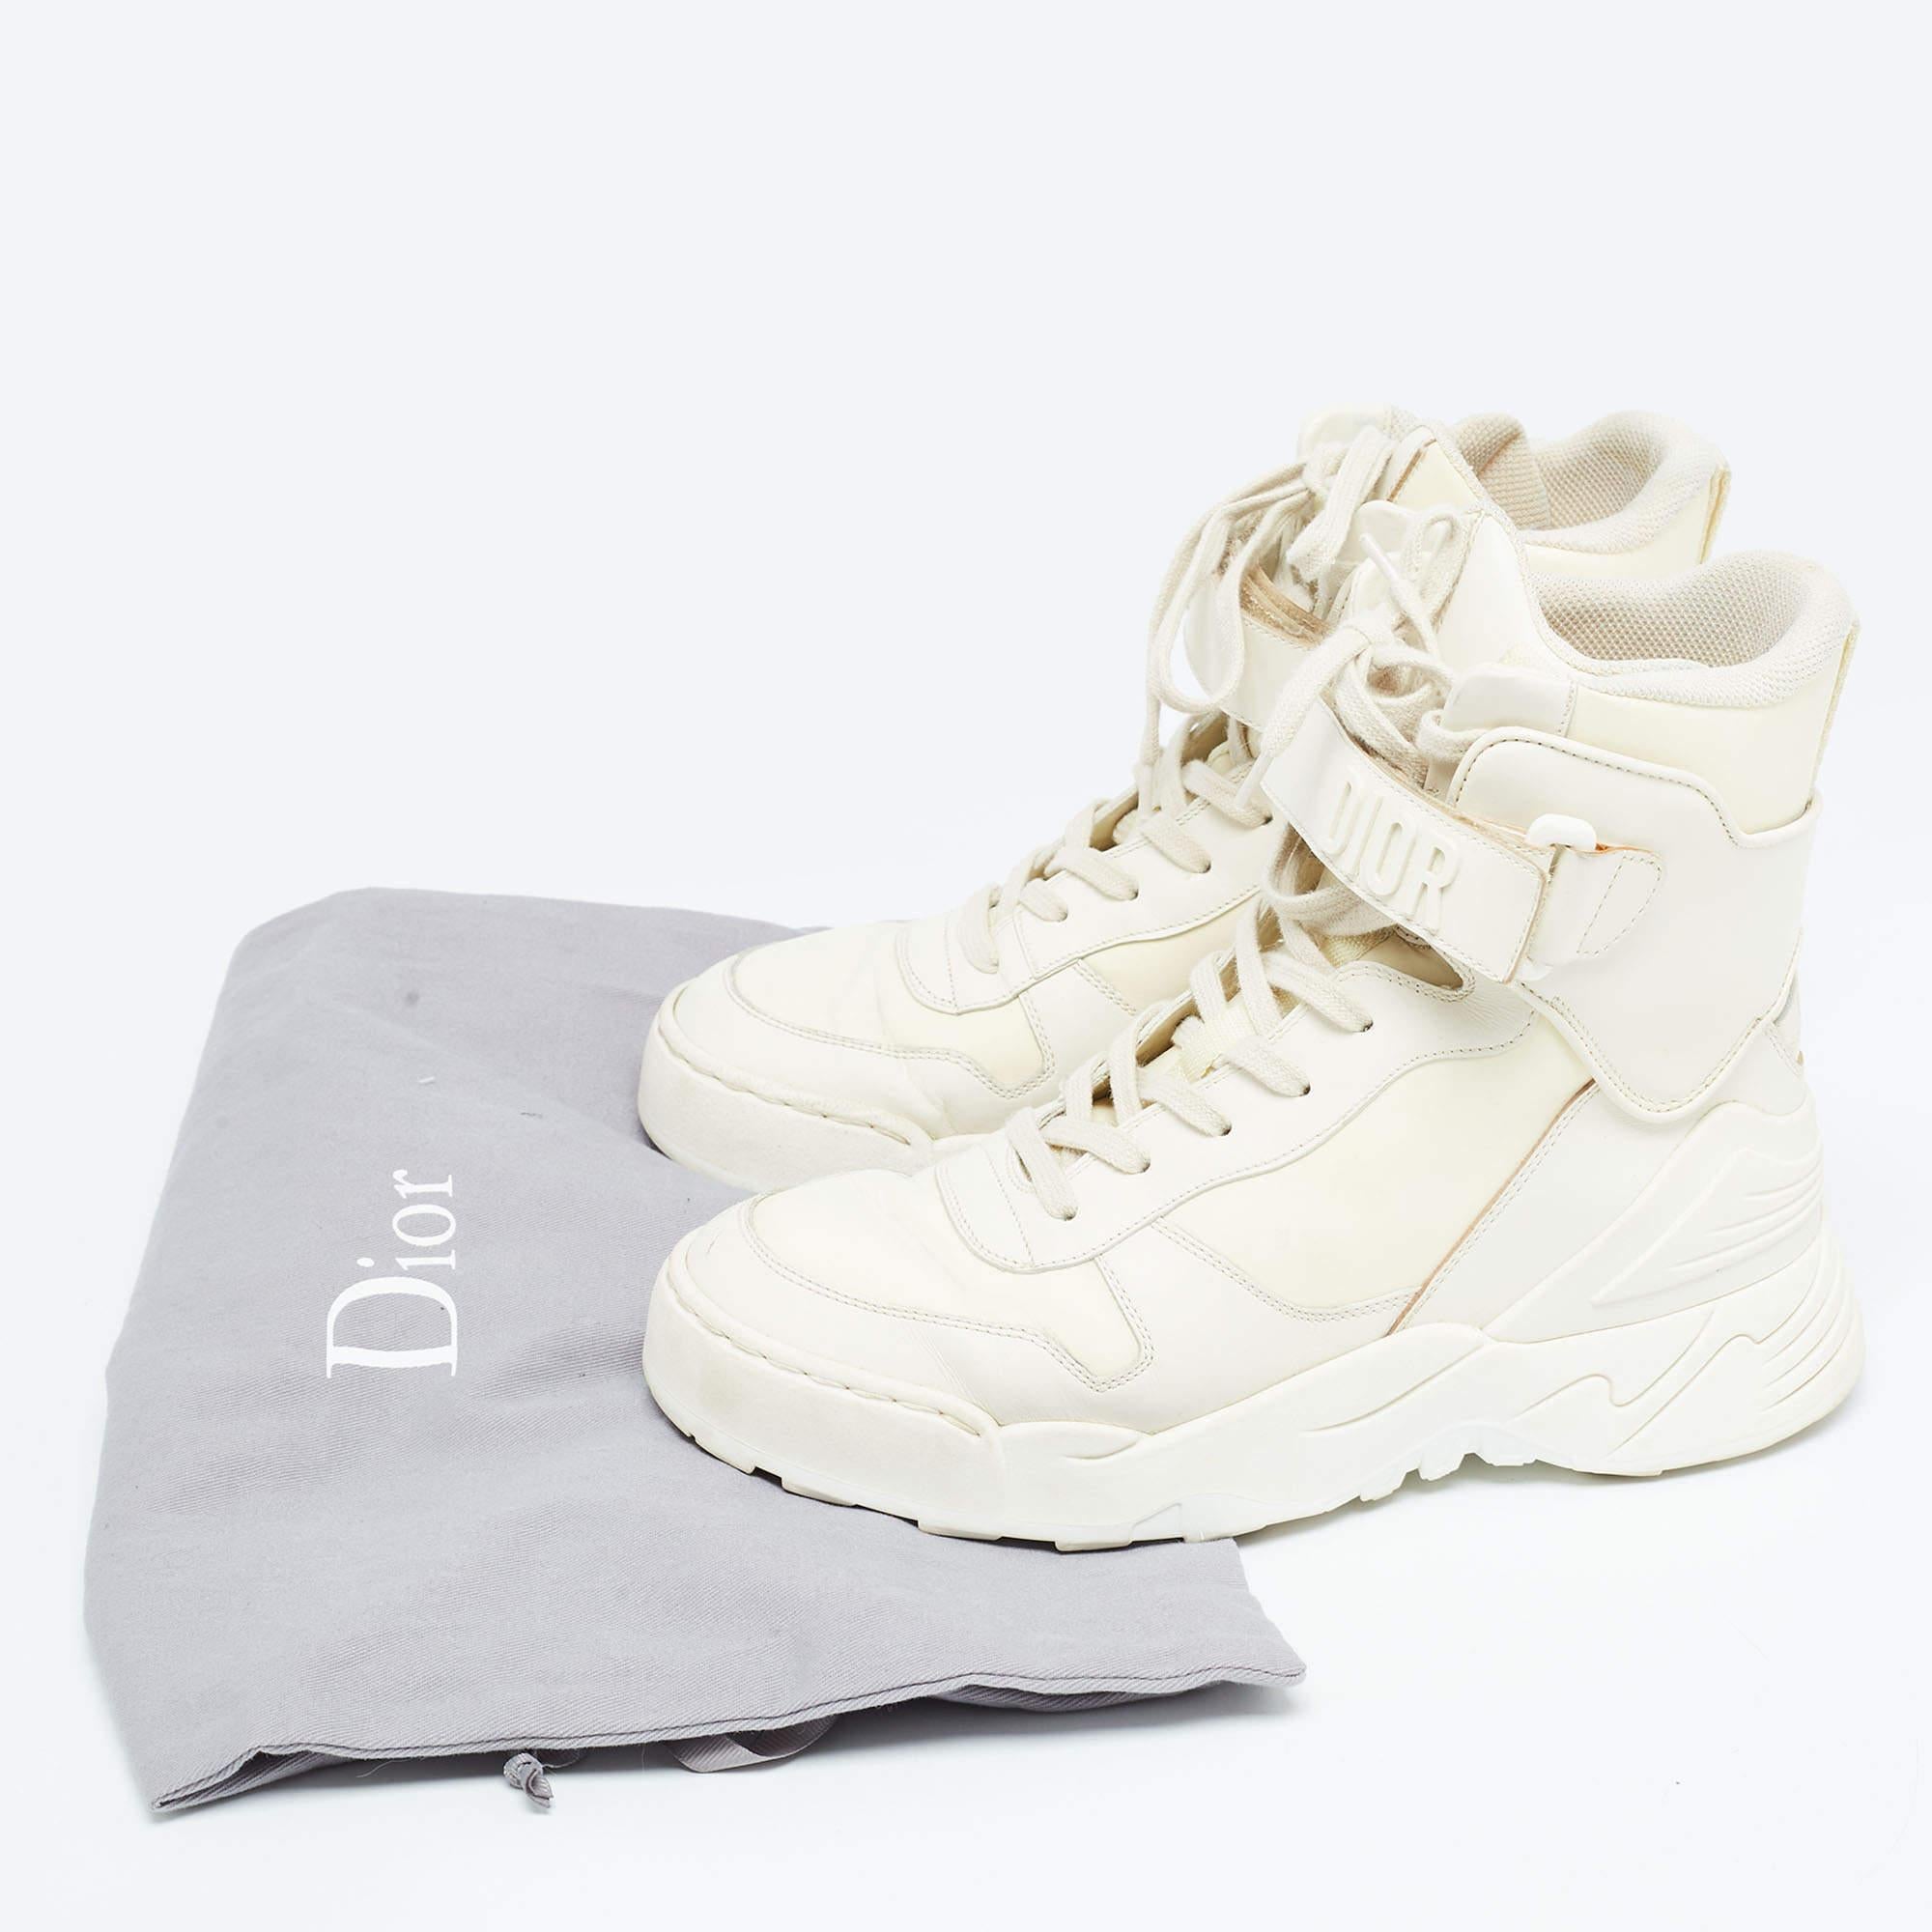 Dior Cream Leather Jumper High Top Sneakers Size 36 For Sale 4